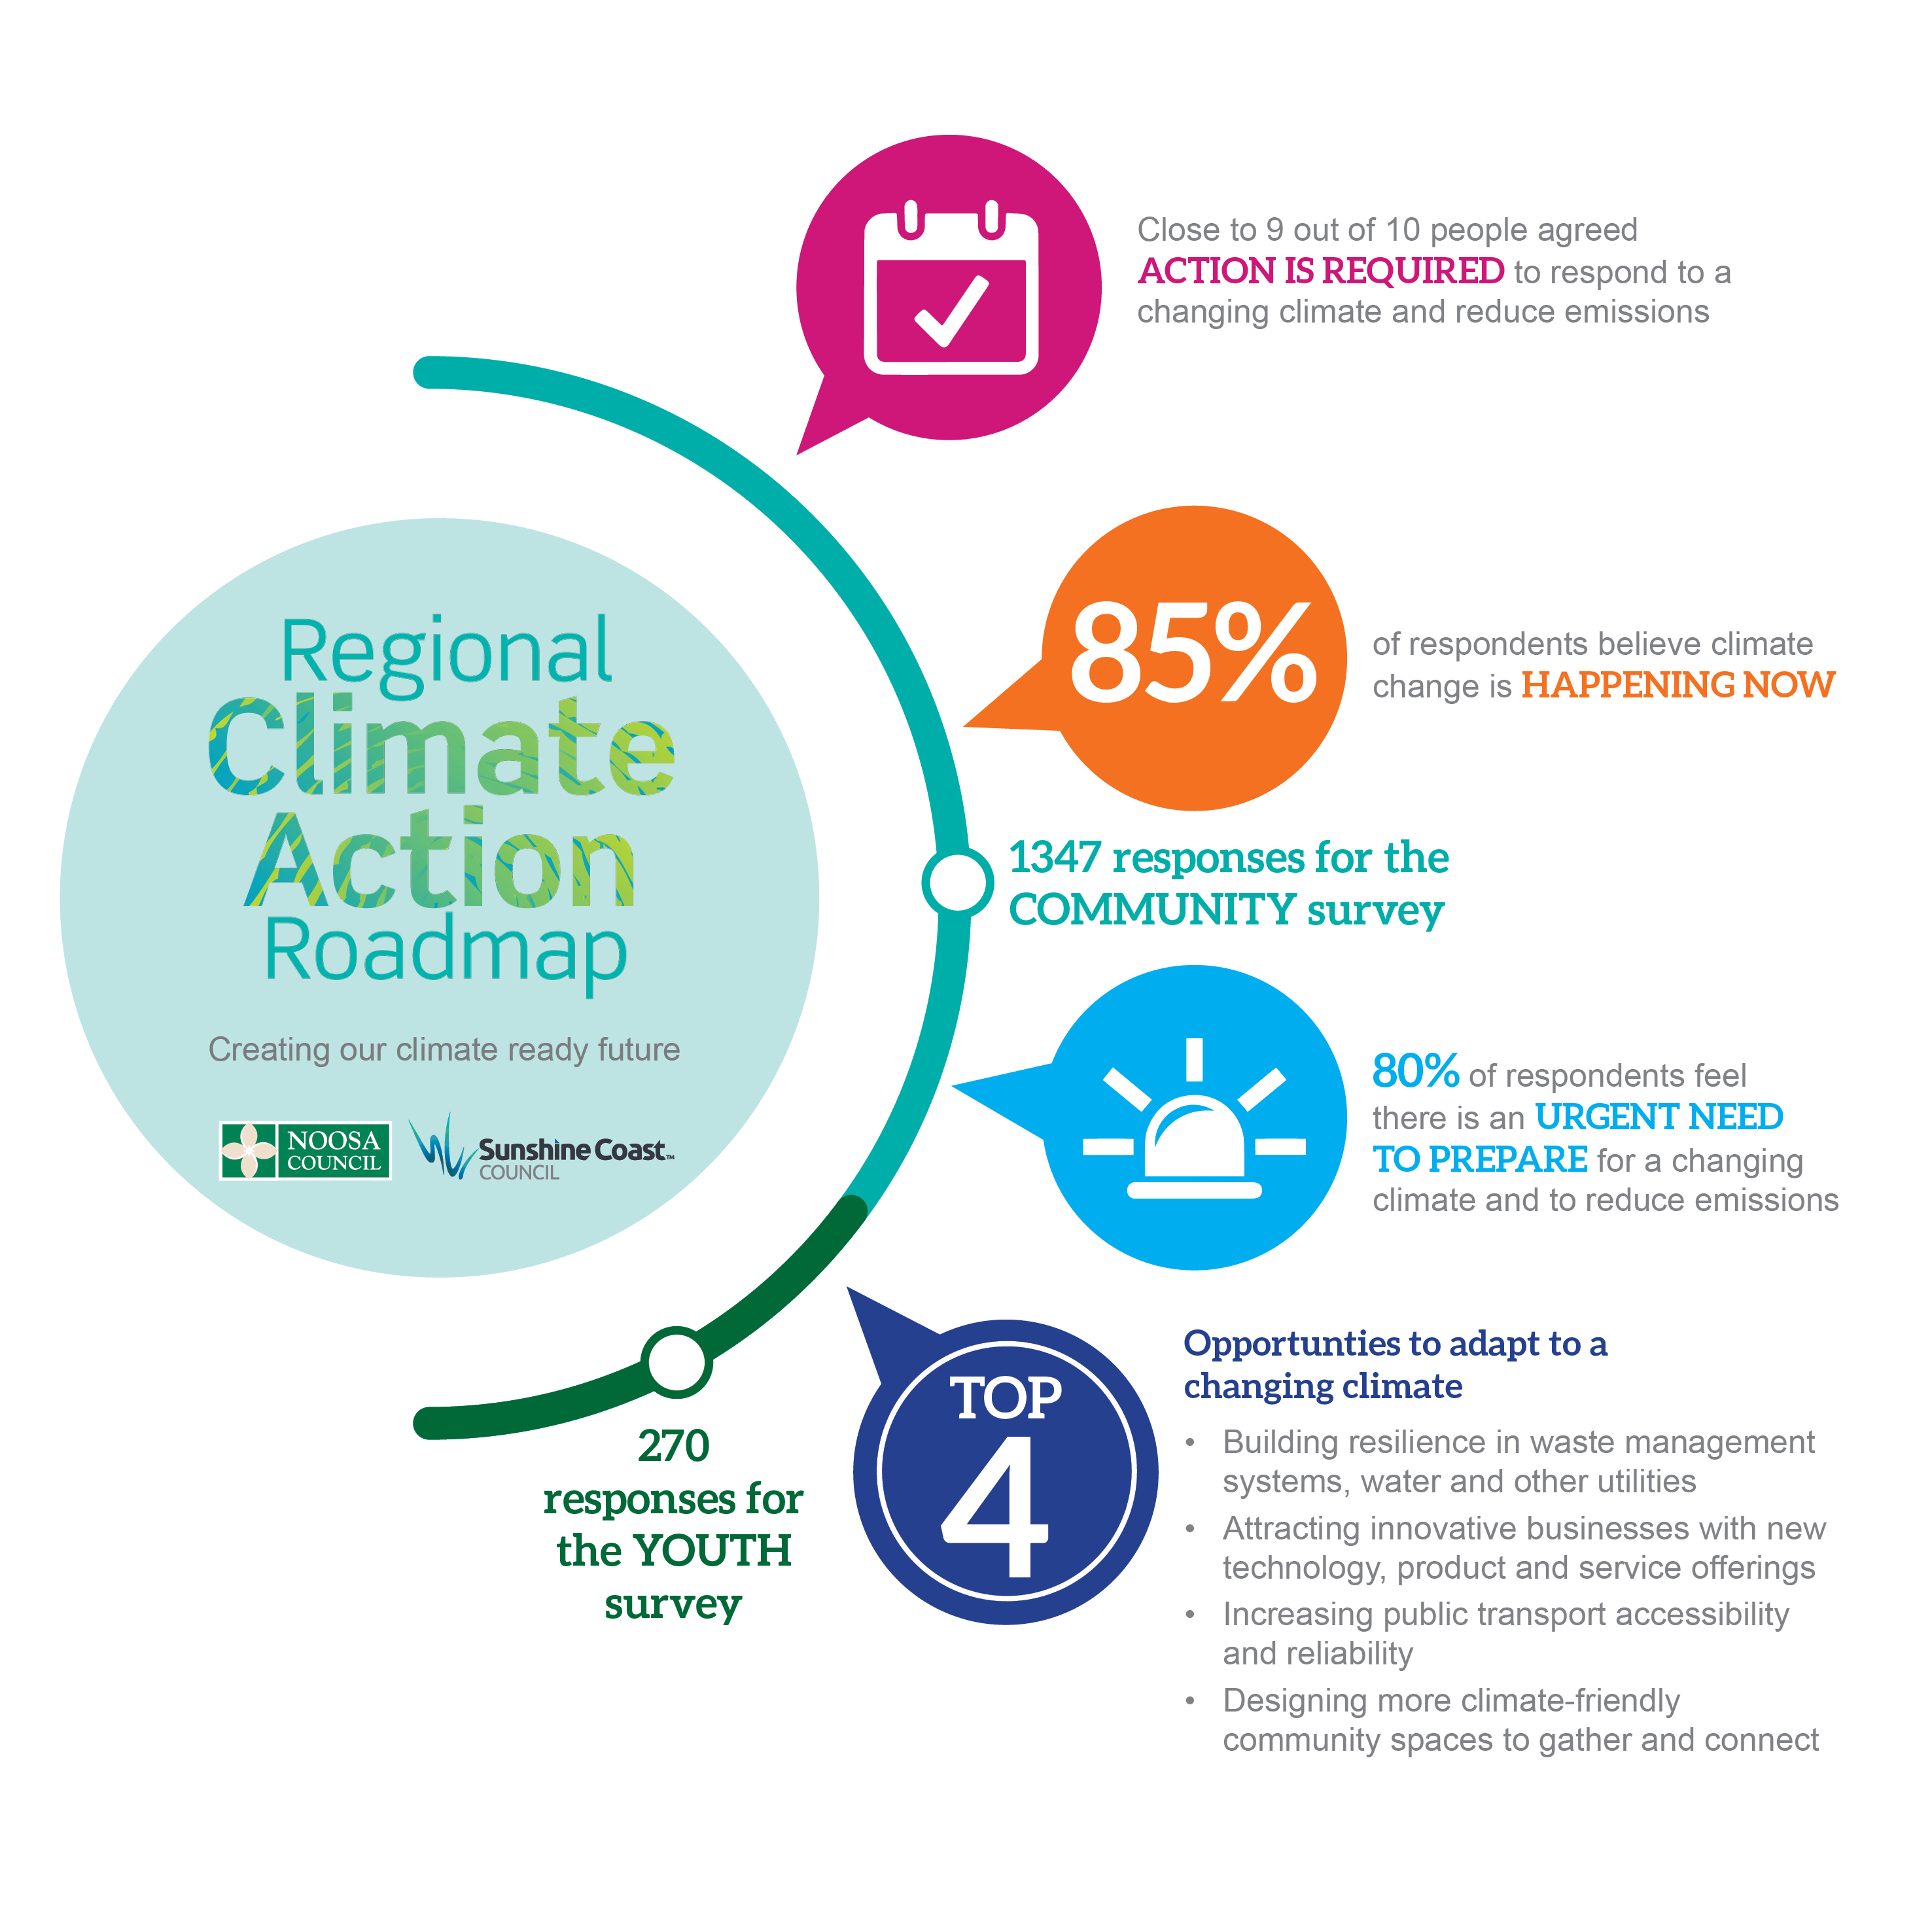 Regional Climate Action Roadmap